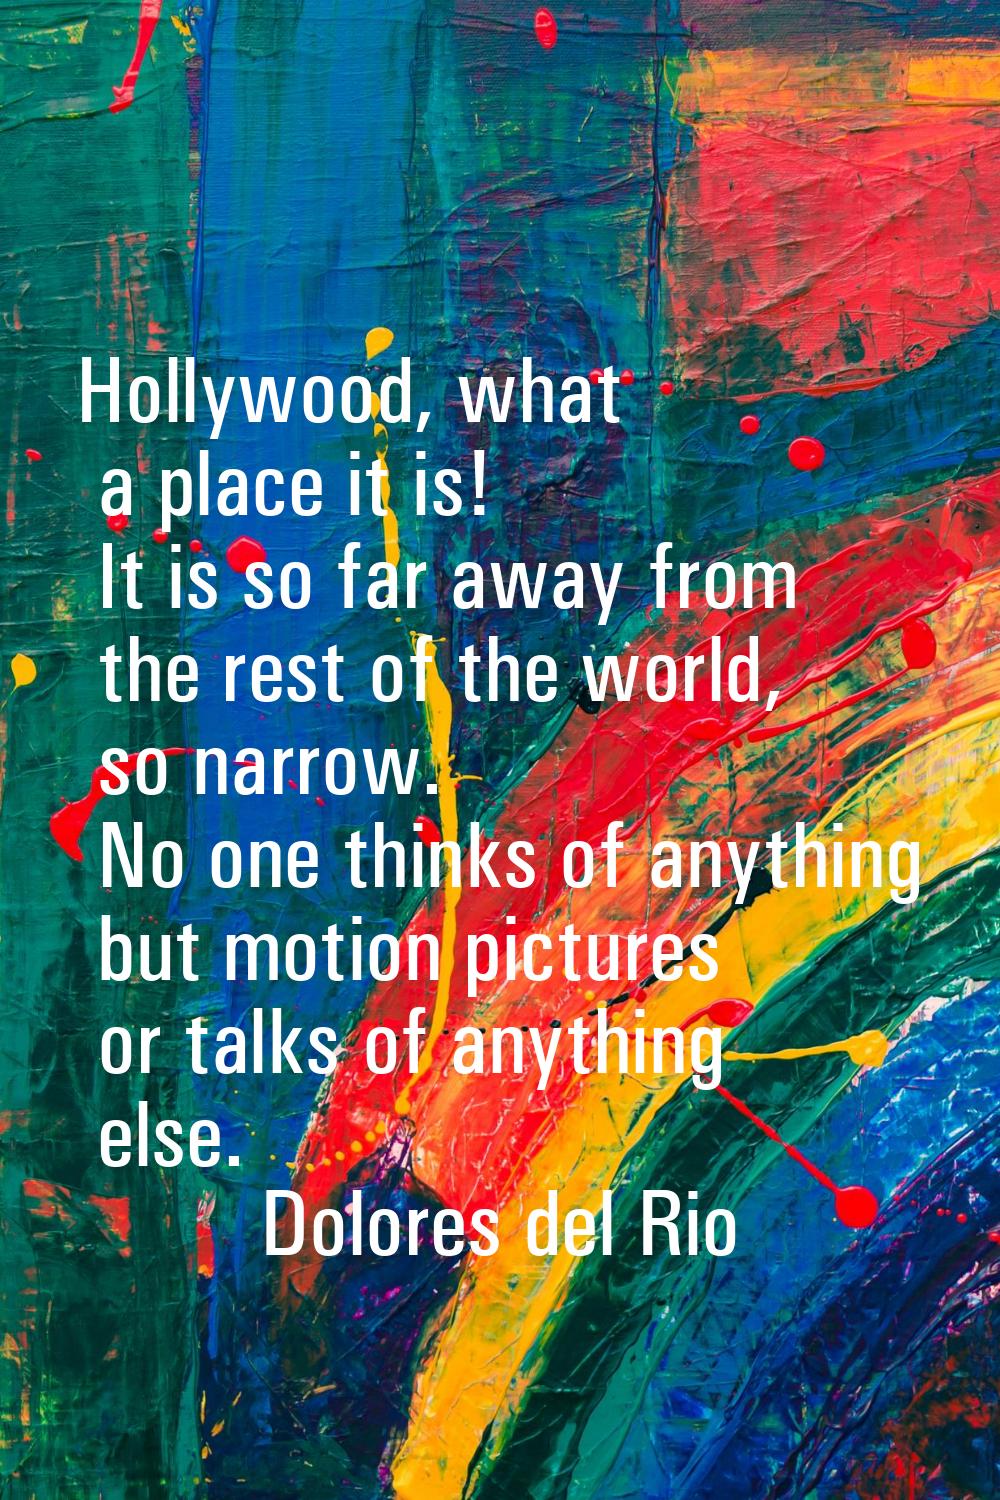 Hollywood, what a place it is! It is so far away from the rest of the world, so narrow. No one thin